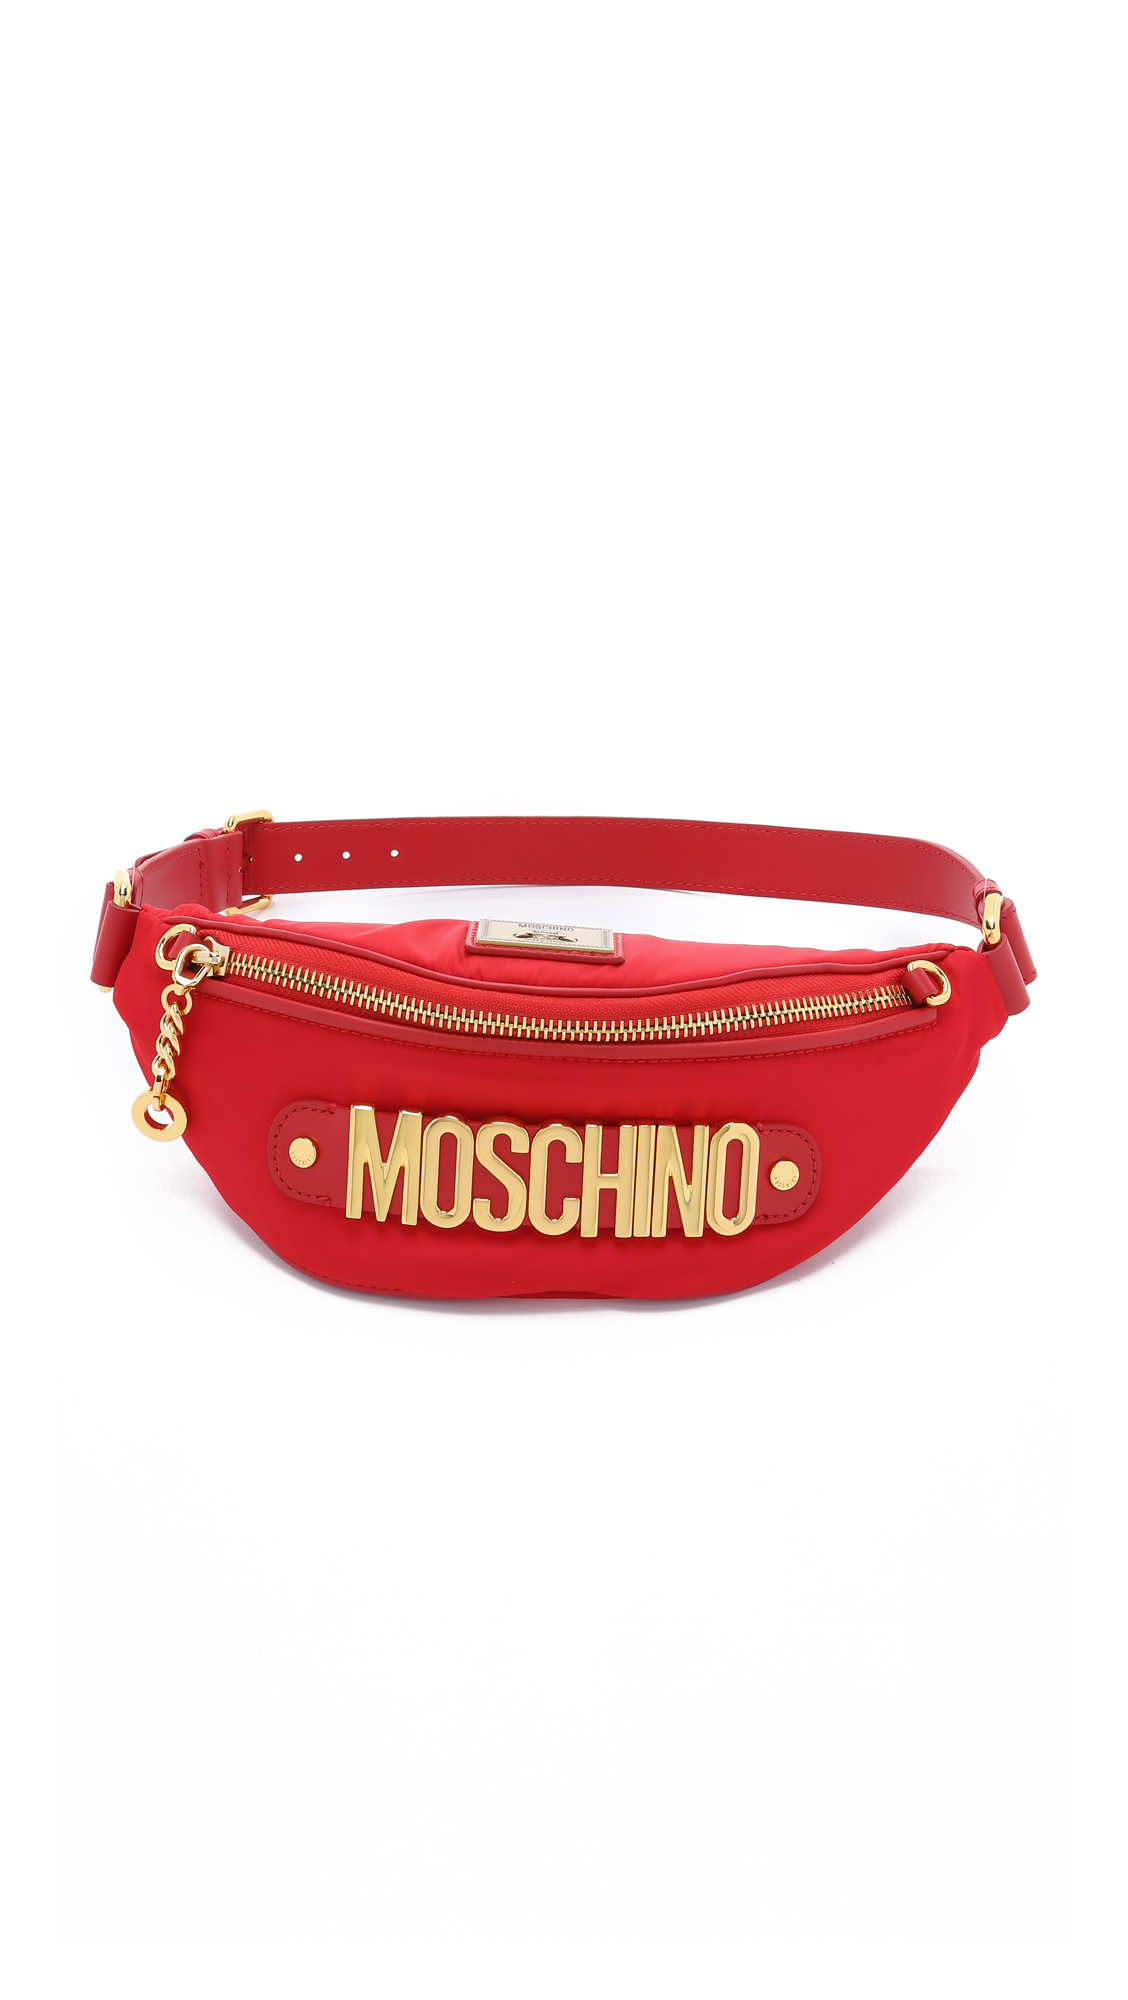 Moschino Fanny Pack - Red - Lyst